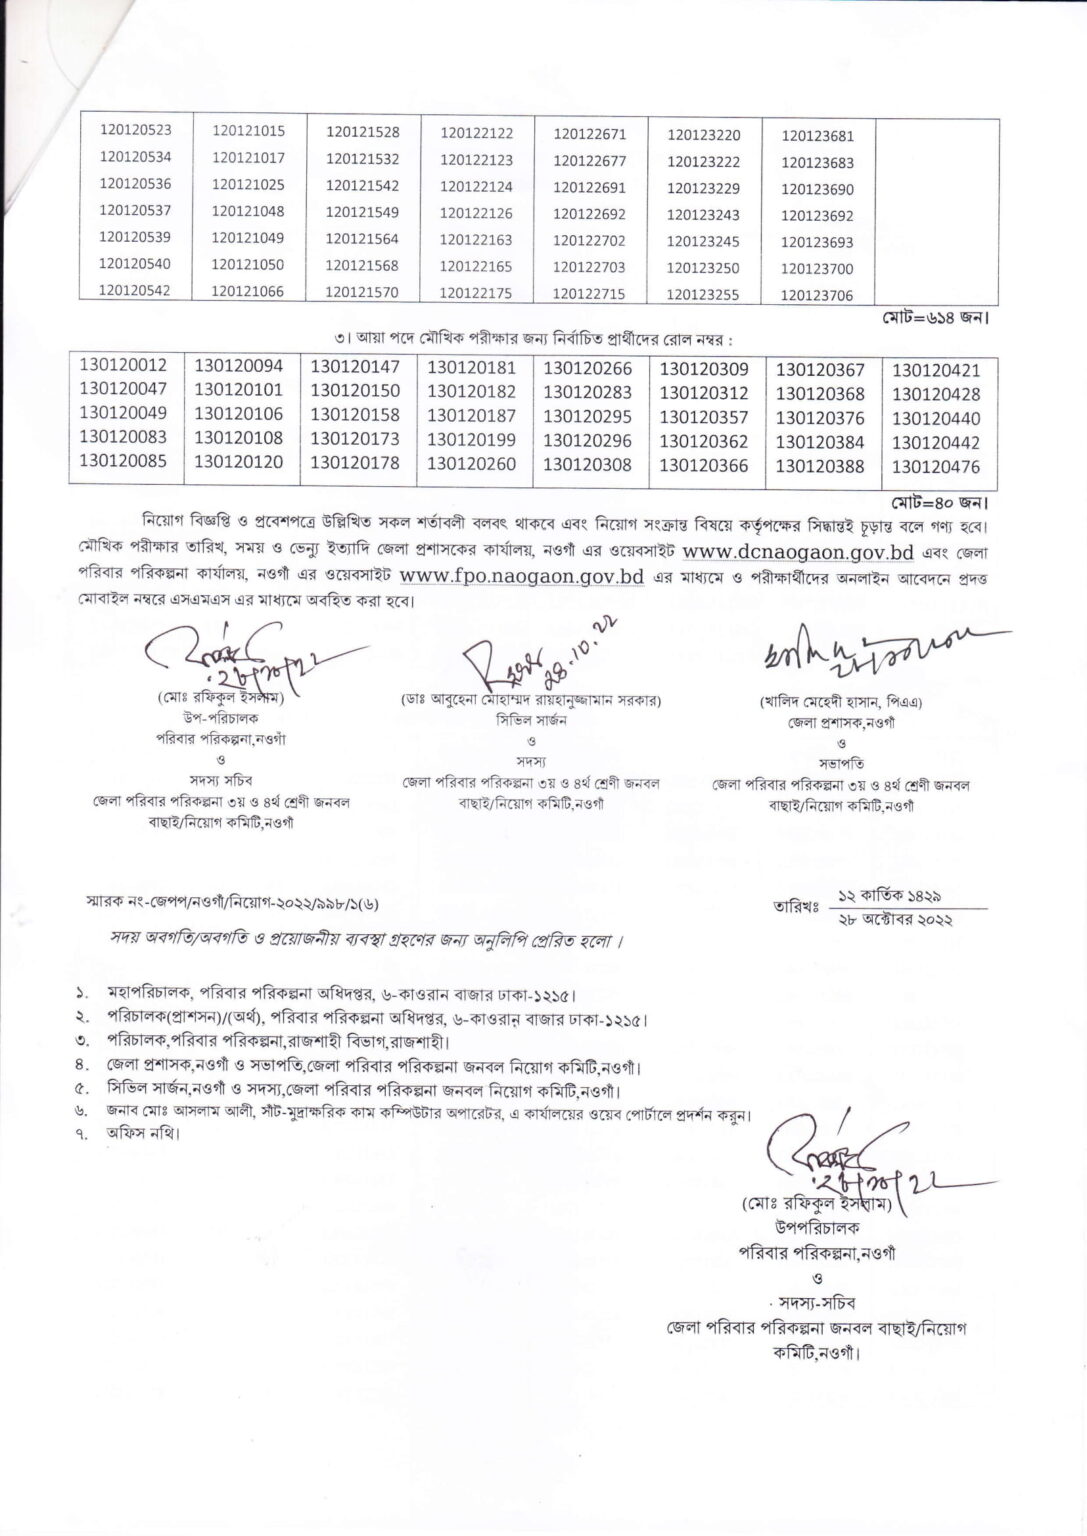 District-Family-Planning-Office-Naogaon-Exam-Result-2022-PDF-1-1087x1536